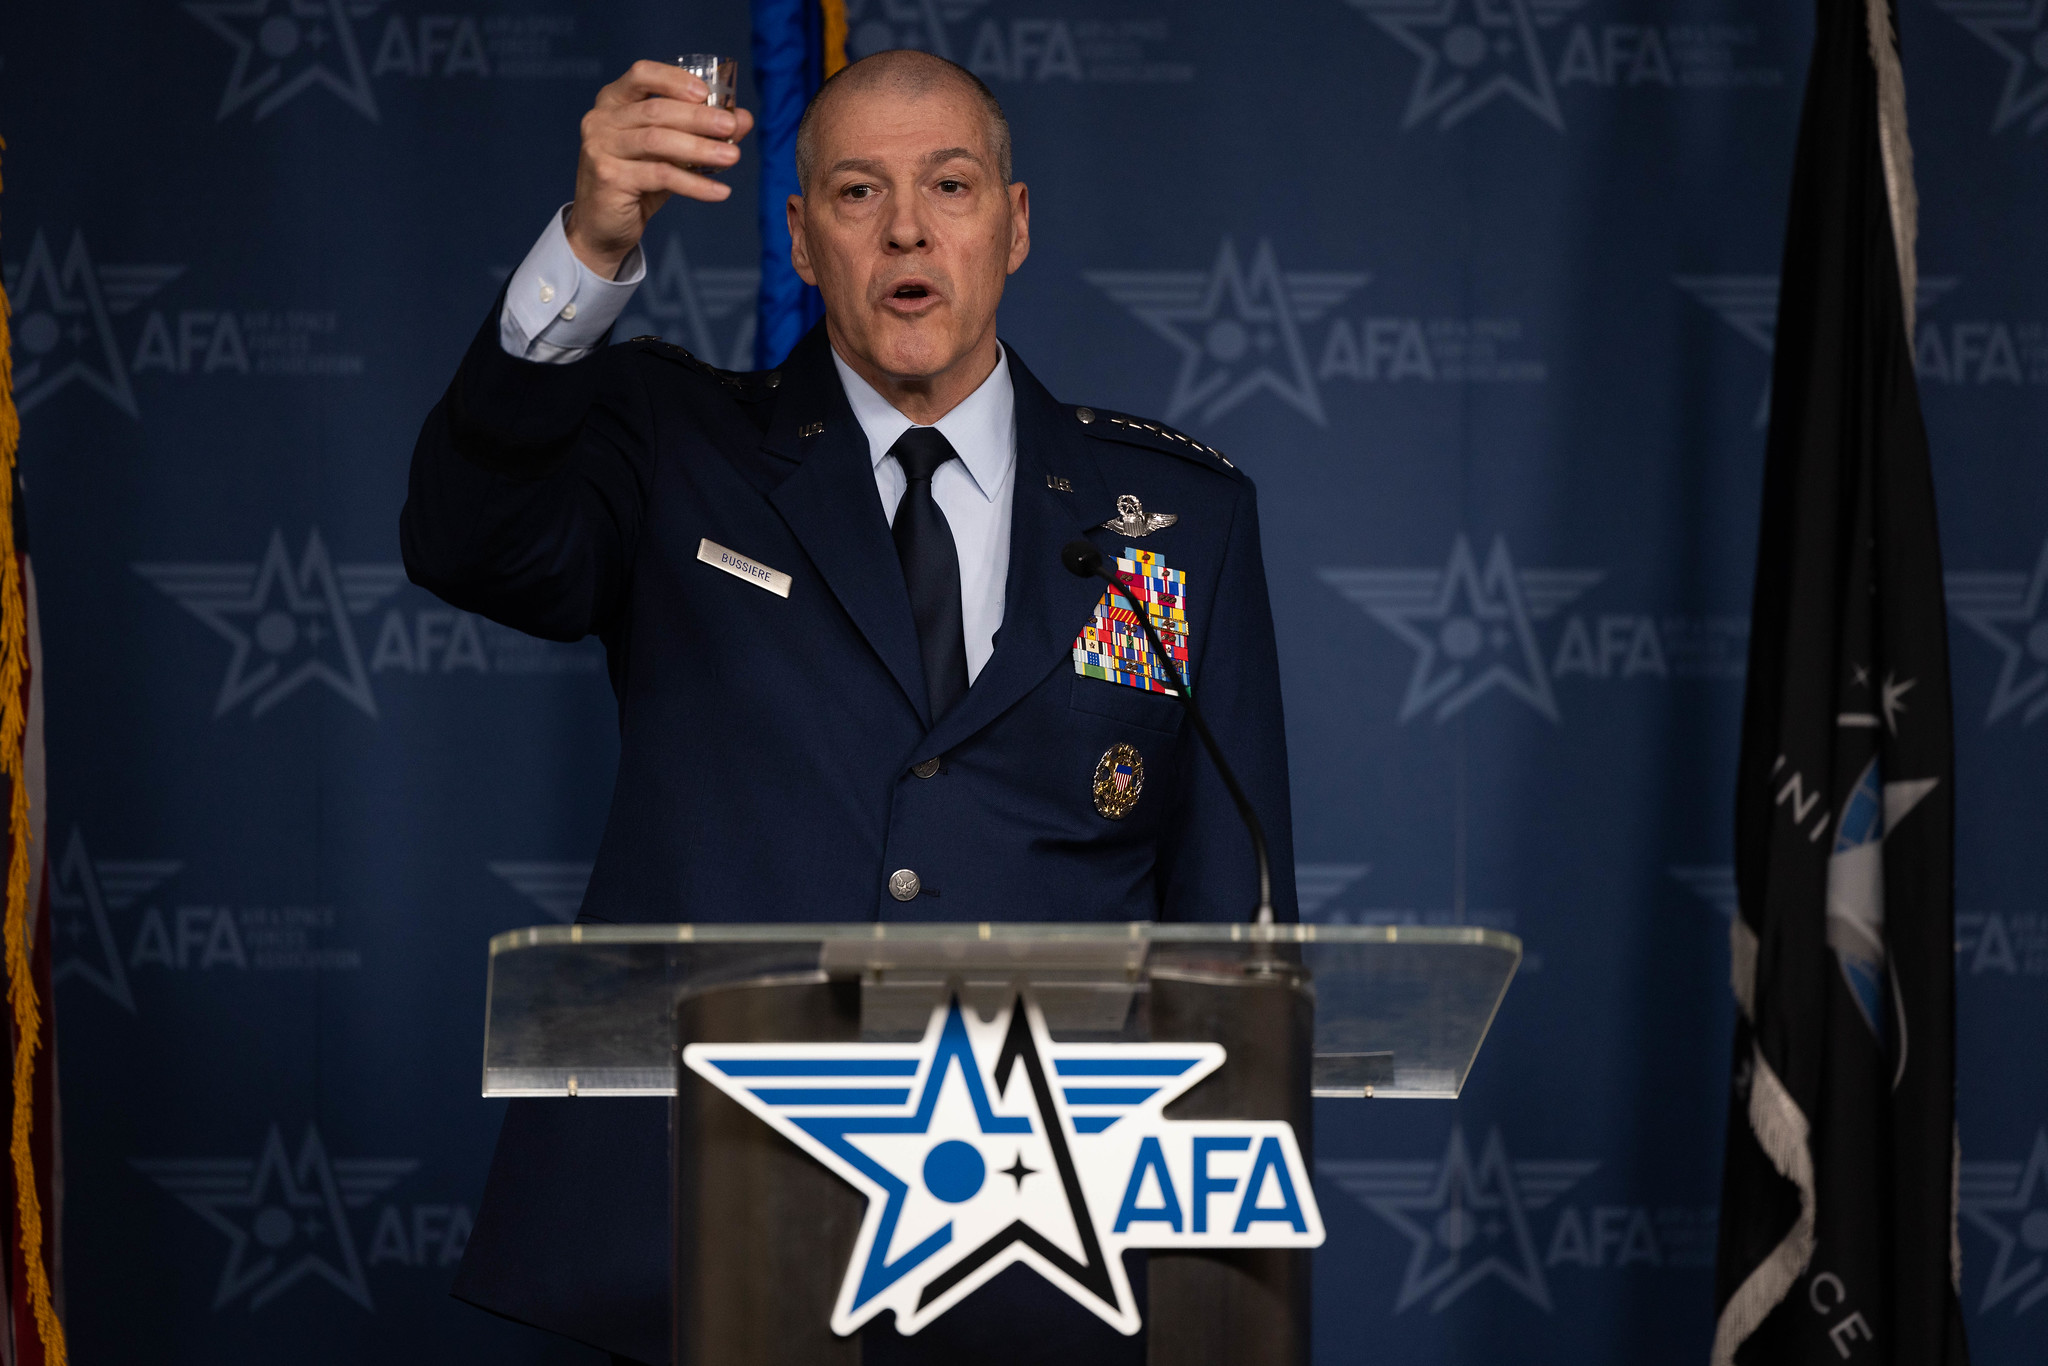 ‘To Those Who Have Gone’: AFA Revives Doolittle Raiders’ Toast in Worldwide Event